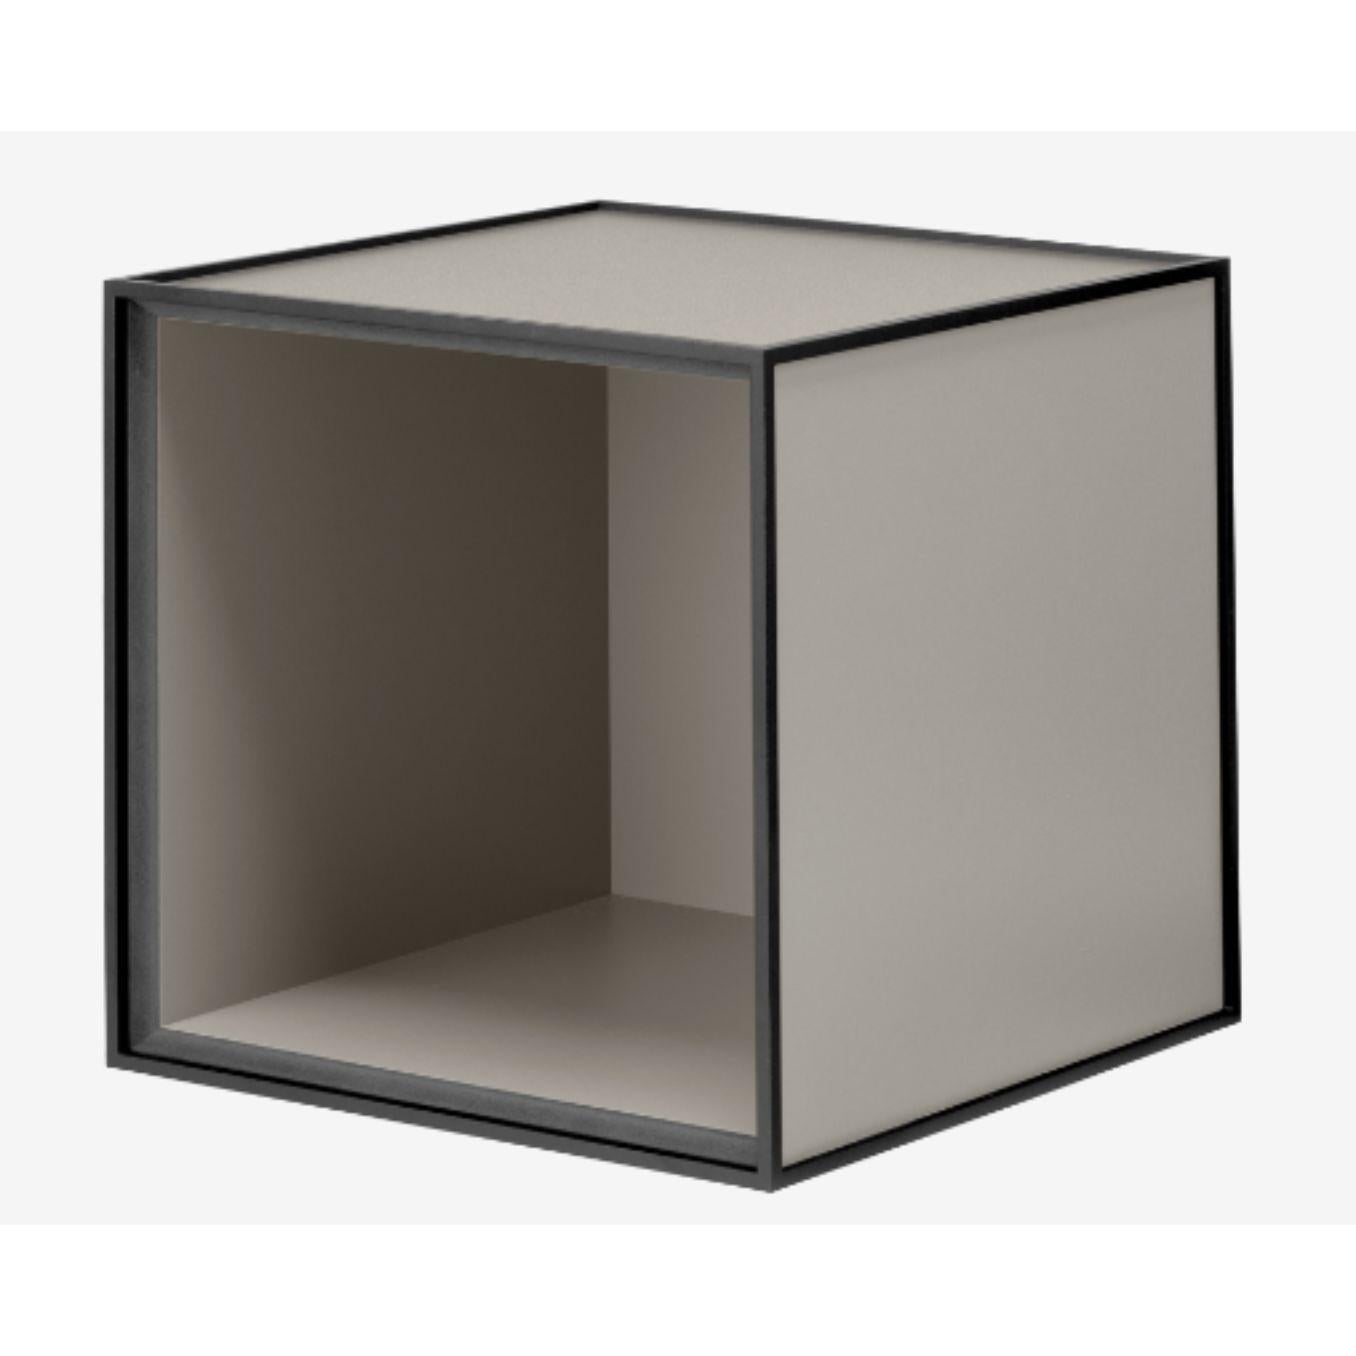 35 sand frame box by Lassen.
Dimensions: W 35 x D 35 x H 35 cm 
Materials: Finér, melamin, melamin, melamine, metal, veneer, oak.
Also available in different colors and dimensions. 

By Lassen is a Danish design brand focused on iconic designs